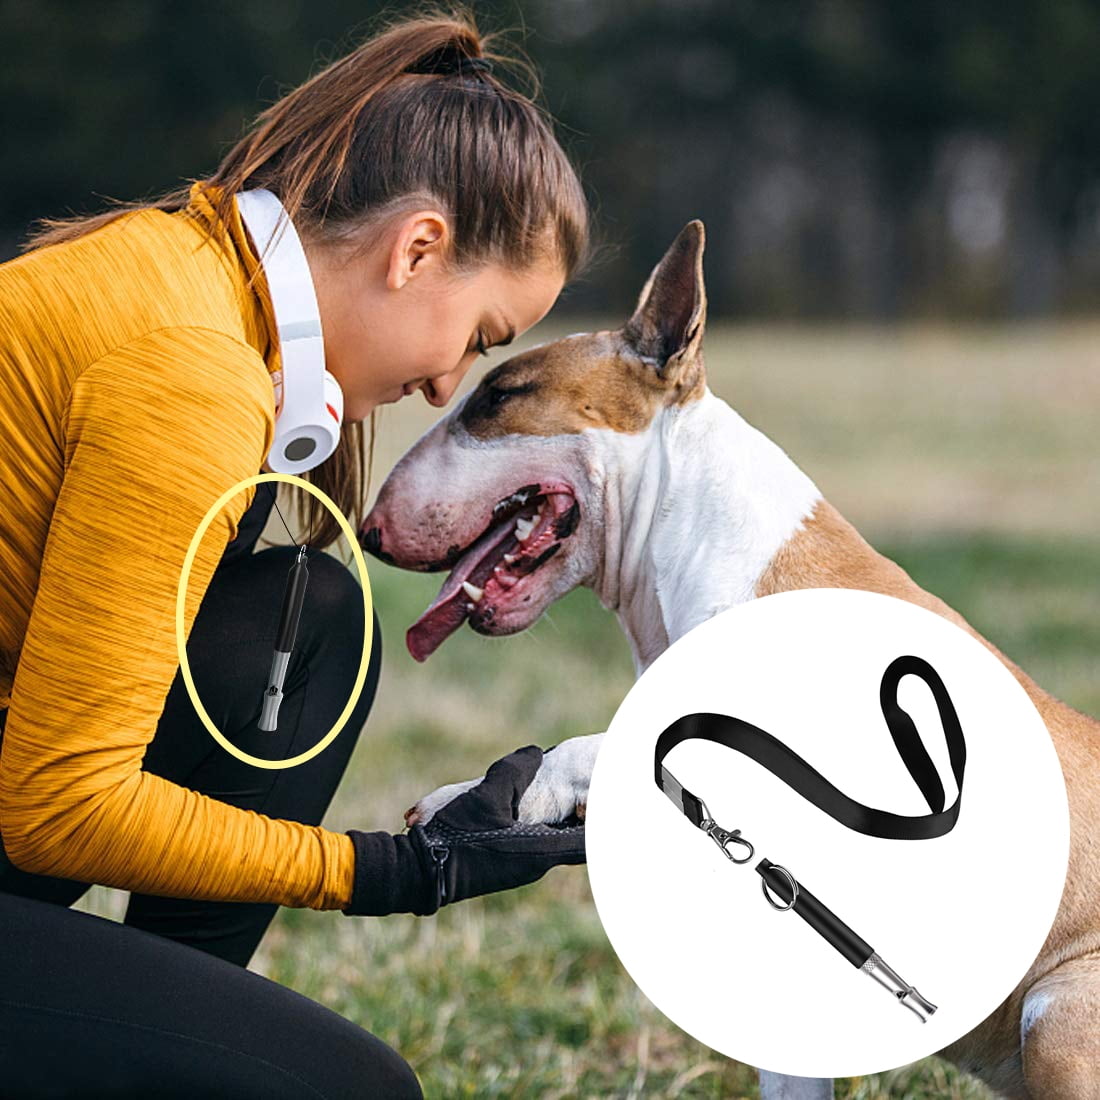 Ultrasonic Dog Whistle Adjustable Frequencies 3pcs Dog Whistle for Stop Barking & Recall 3 Free Lanyard Strap